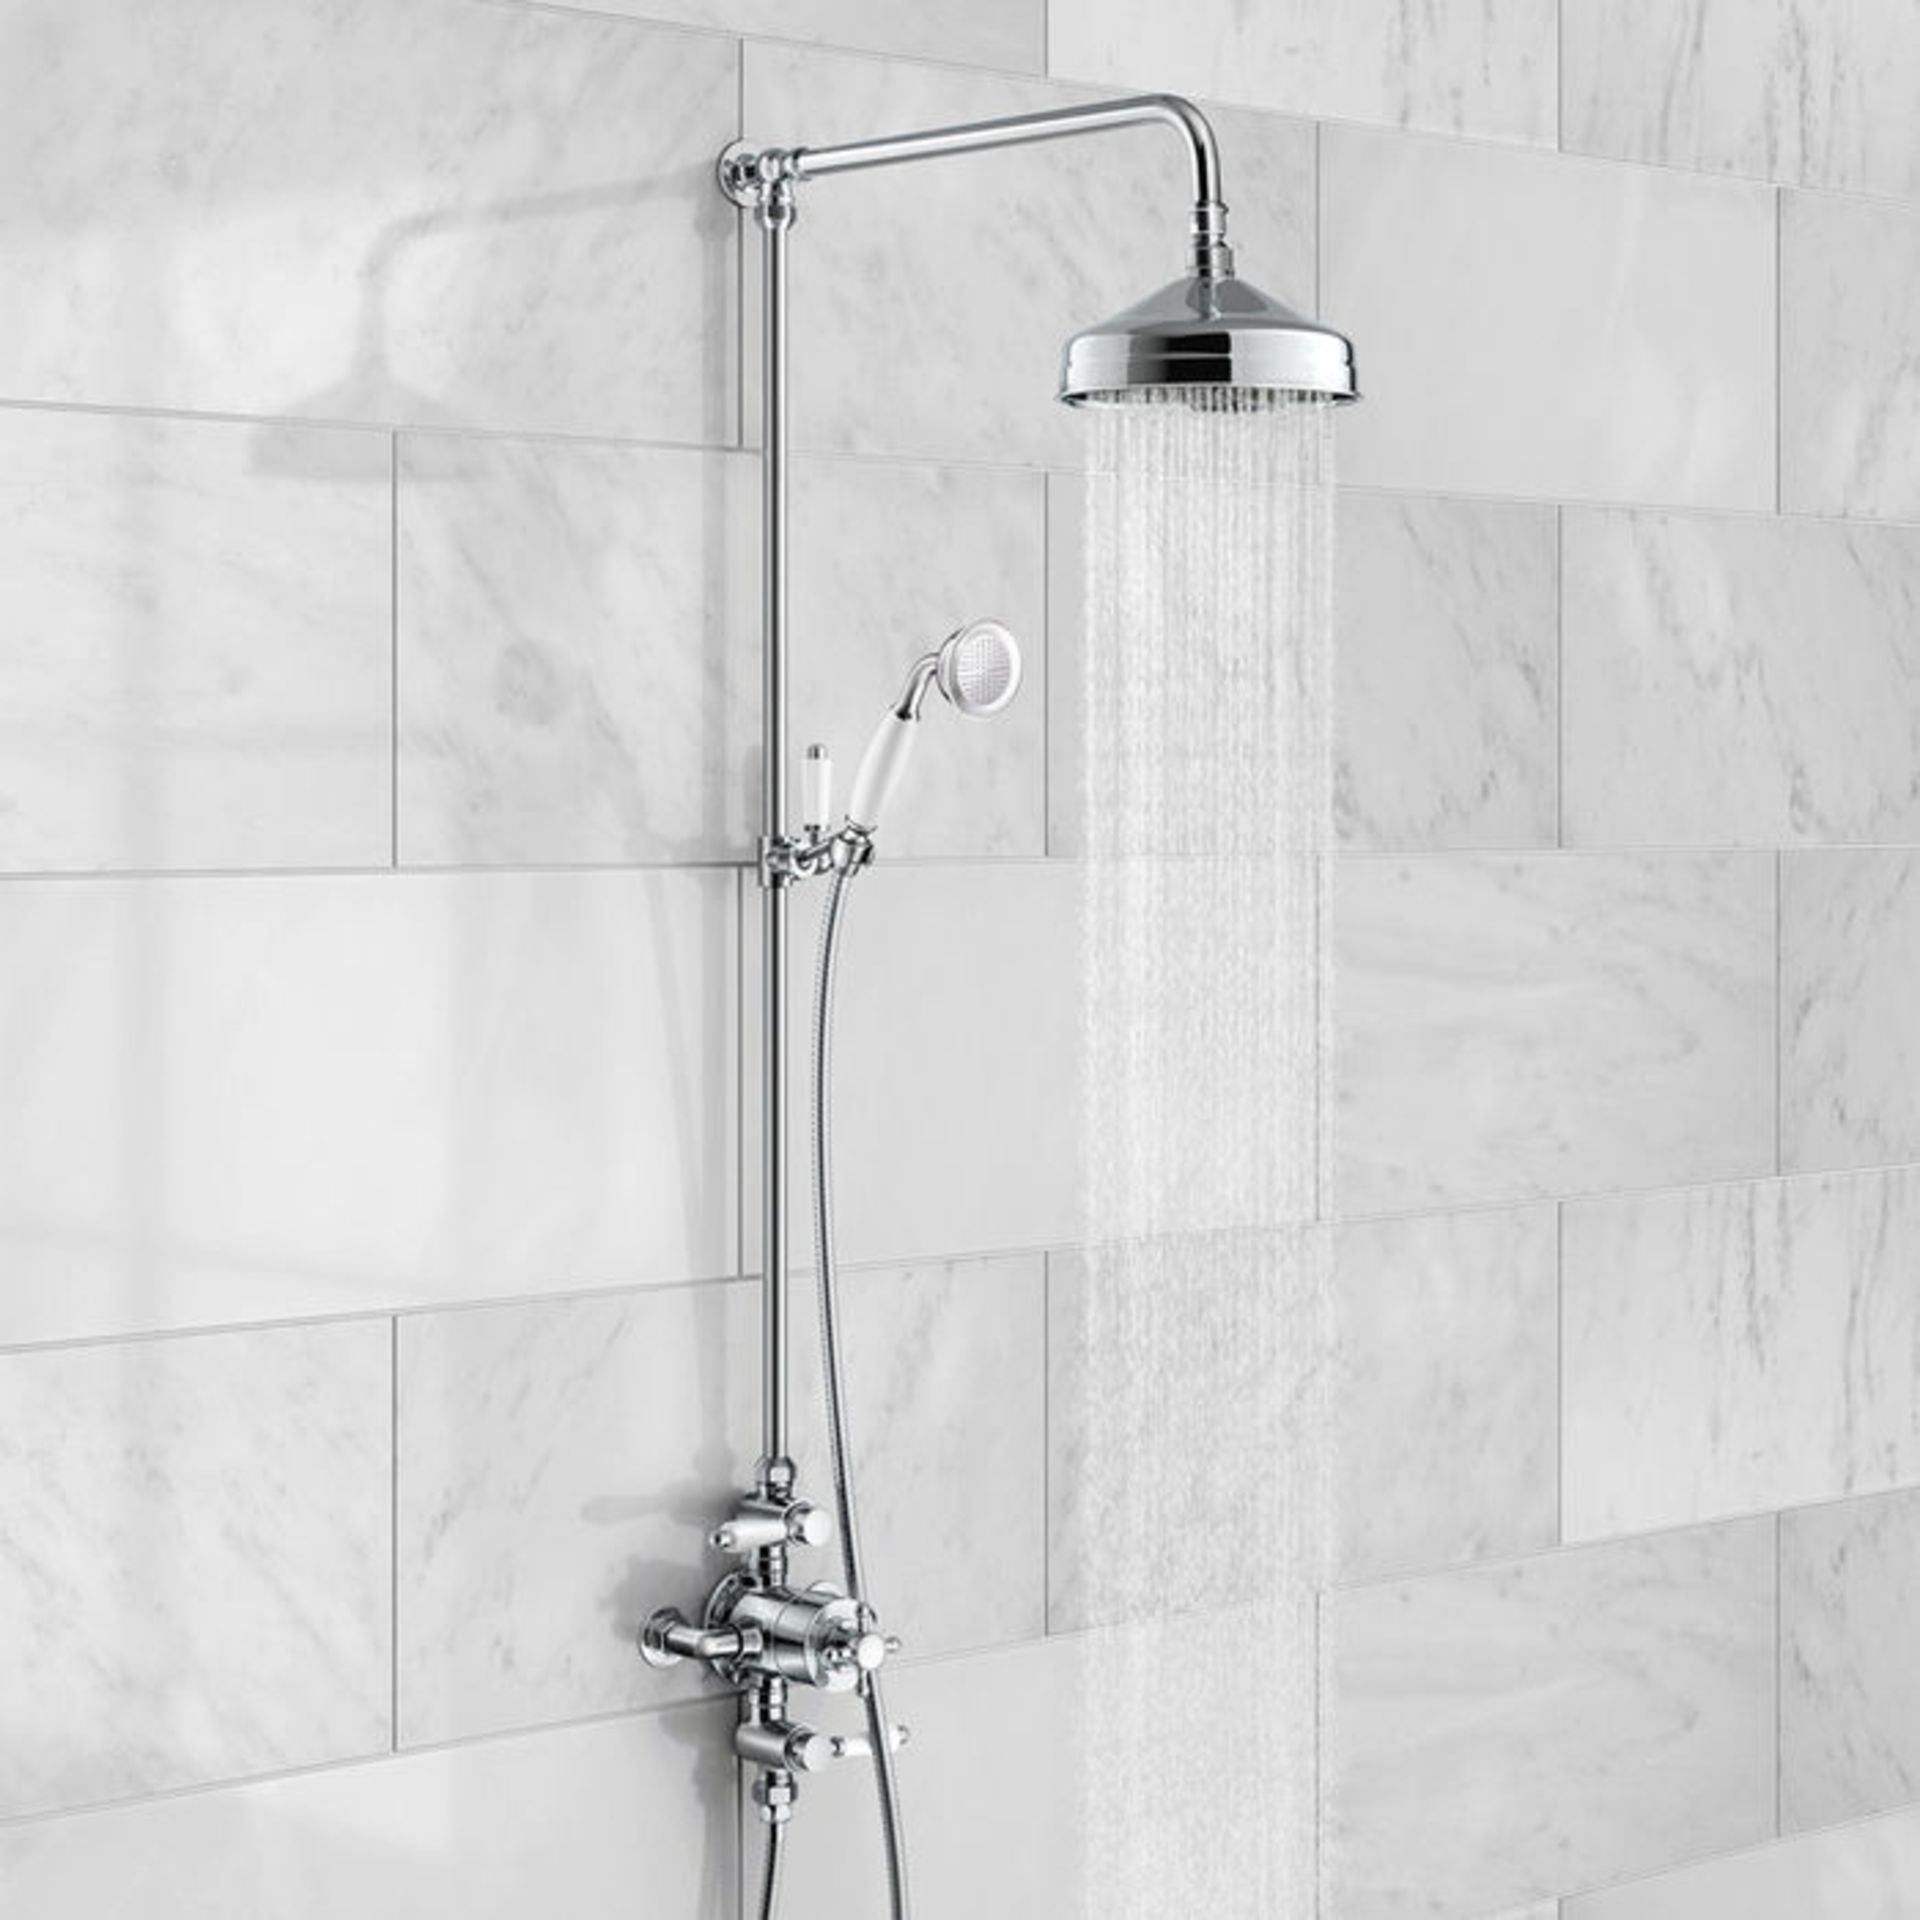 (H181) Traditional Exposed Shower Kit & Medium Head. RRP £249.99. Traditional exposed valve